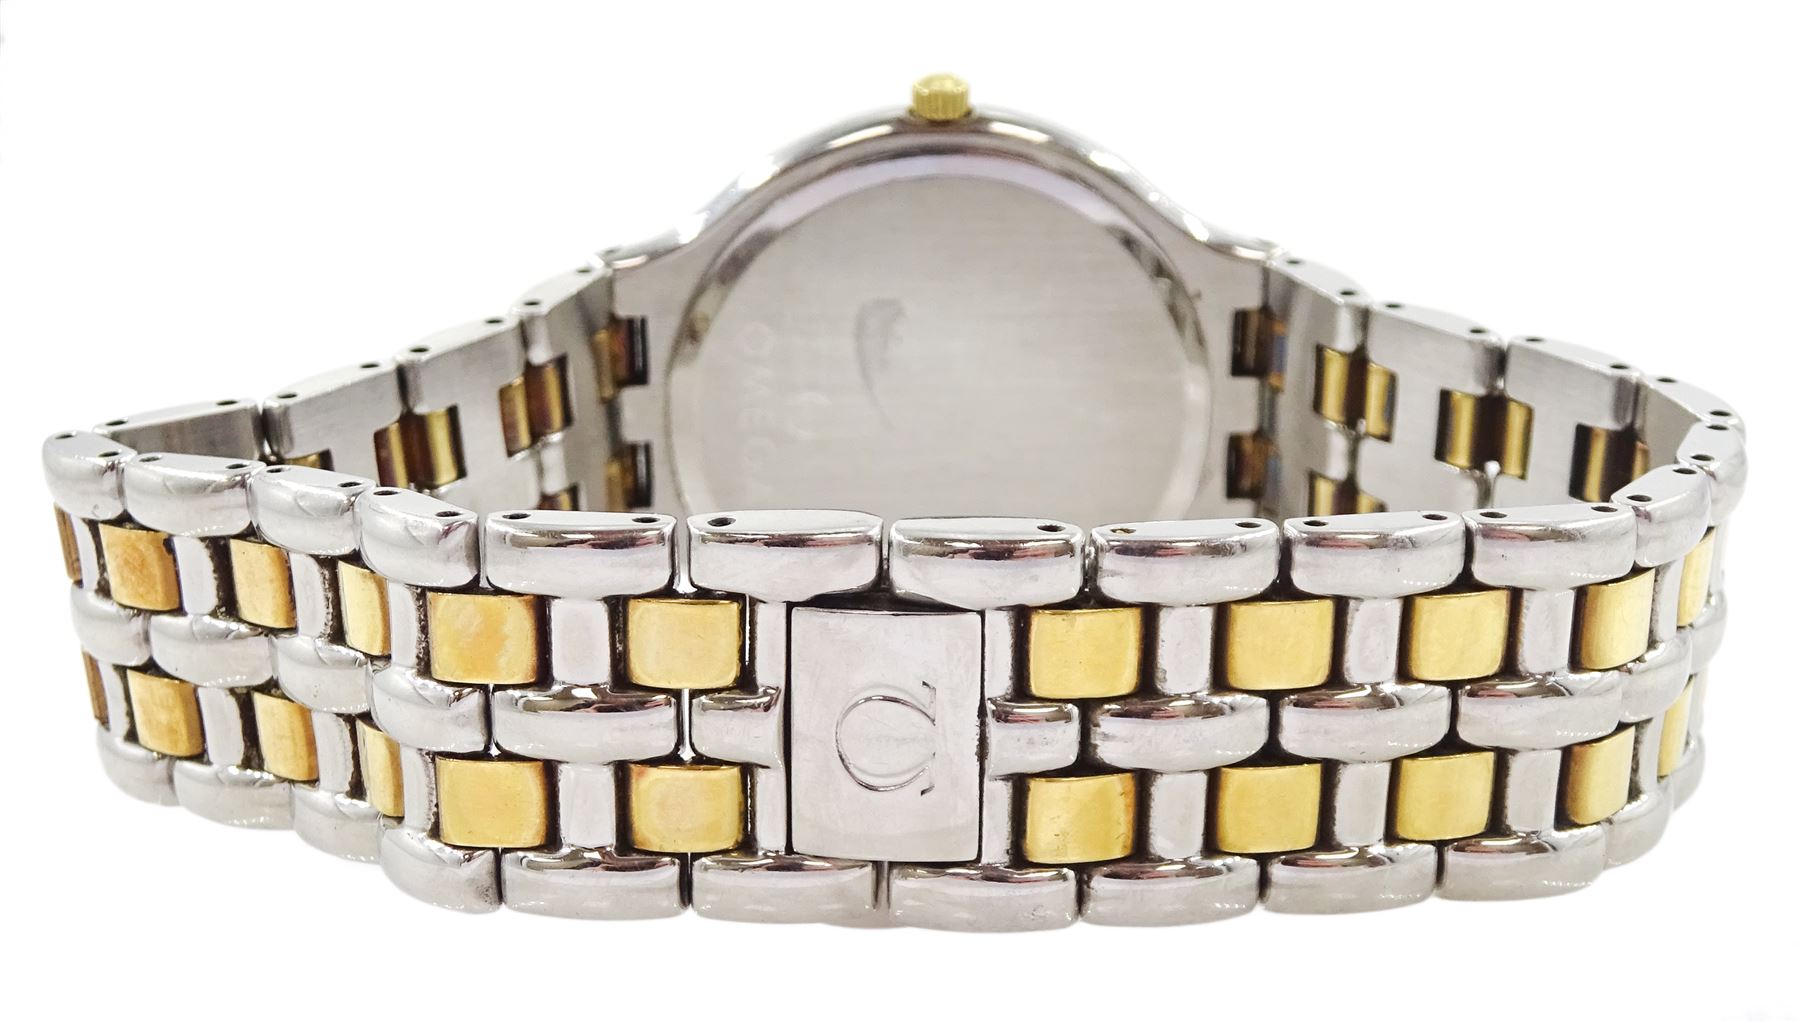 Omega gold and stainless steel quartz wristwatch - Image 2 of 3